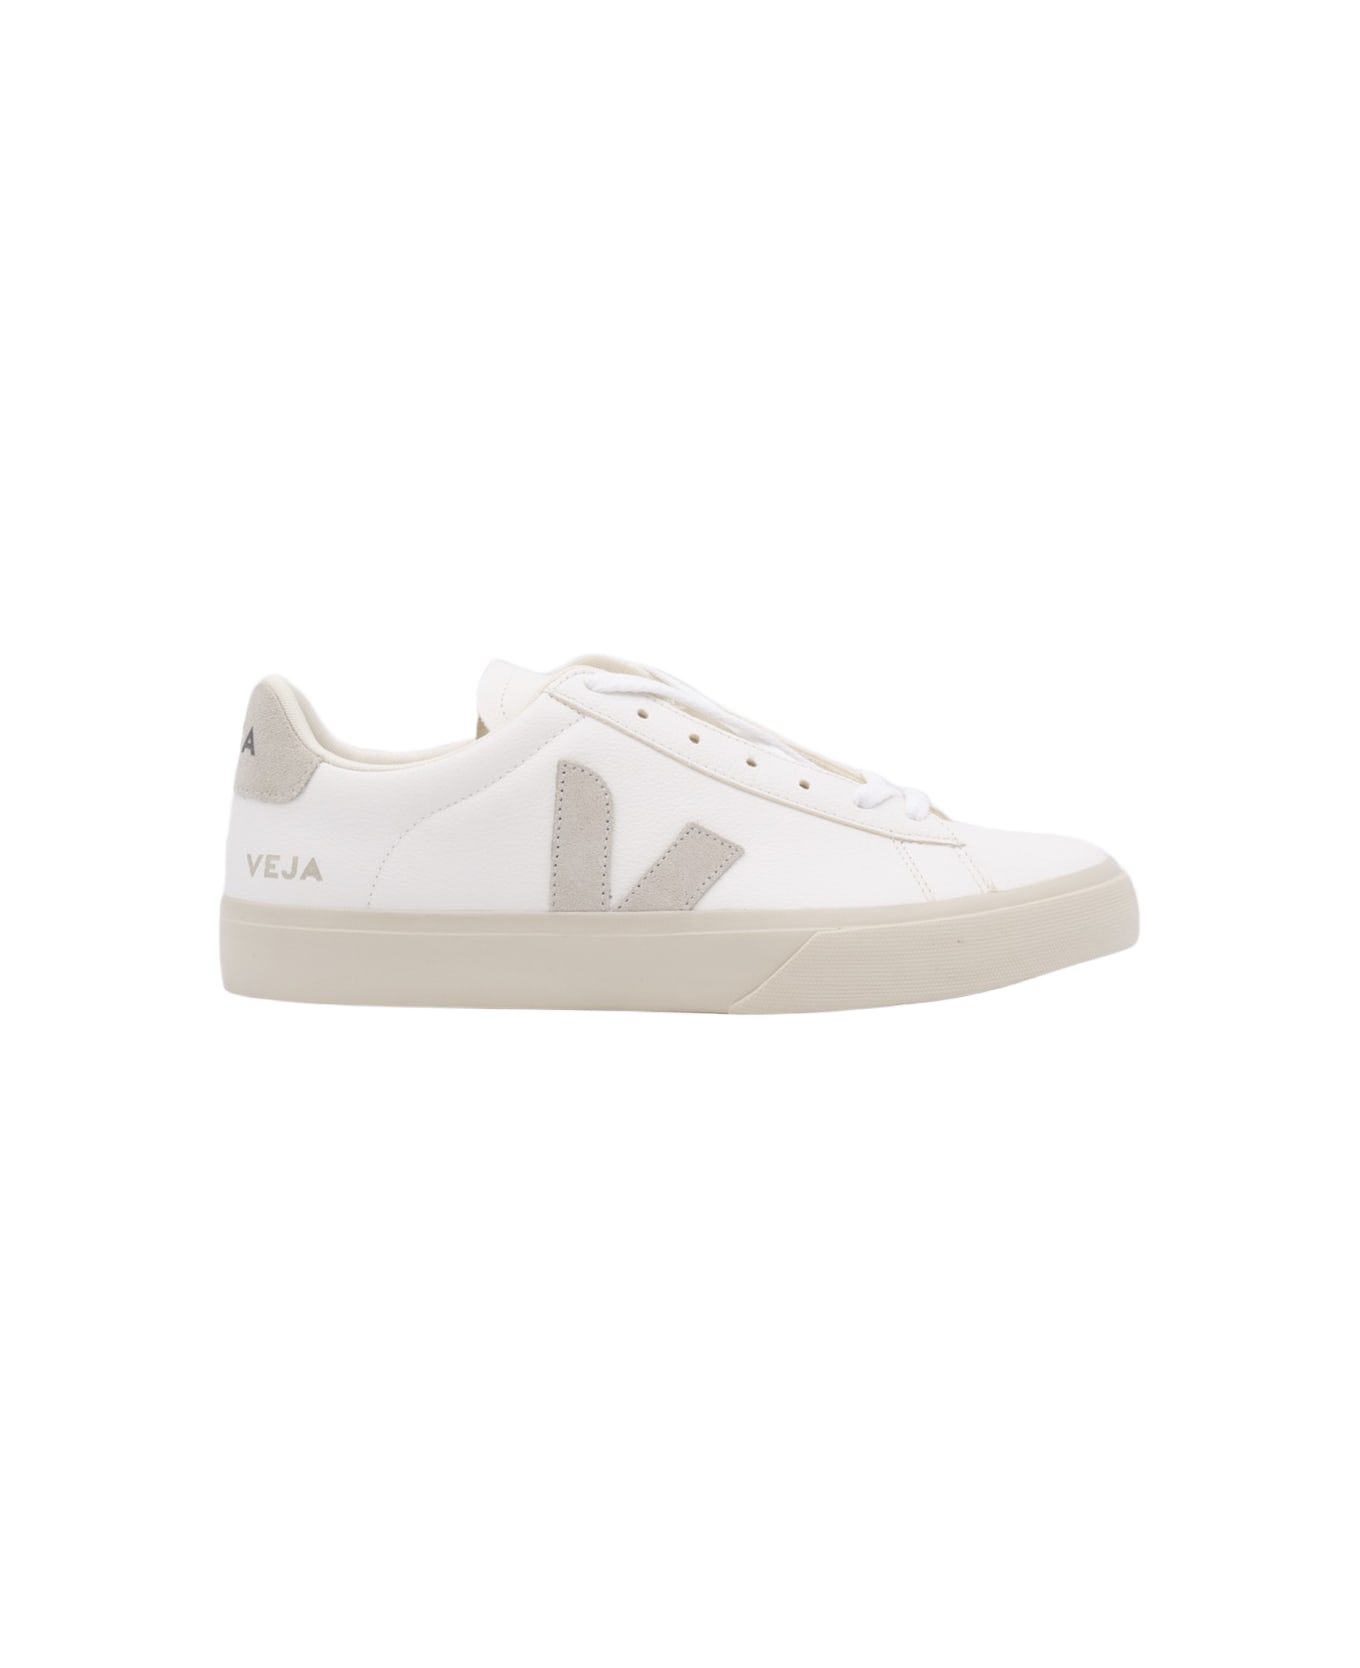 Veja White And Beige Faux Leather Campo Sneakers - EXTRA-WHITE_NATURAL-SUEDE